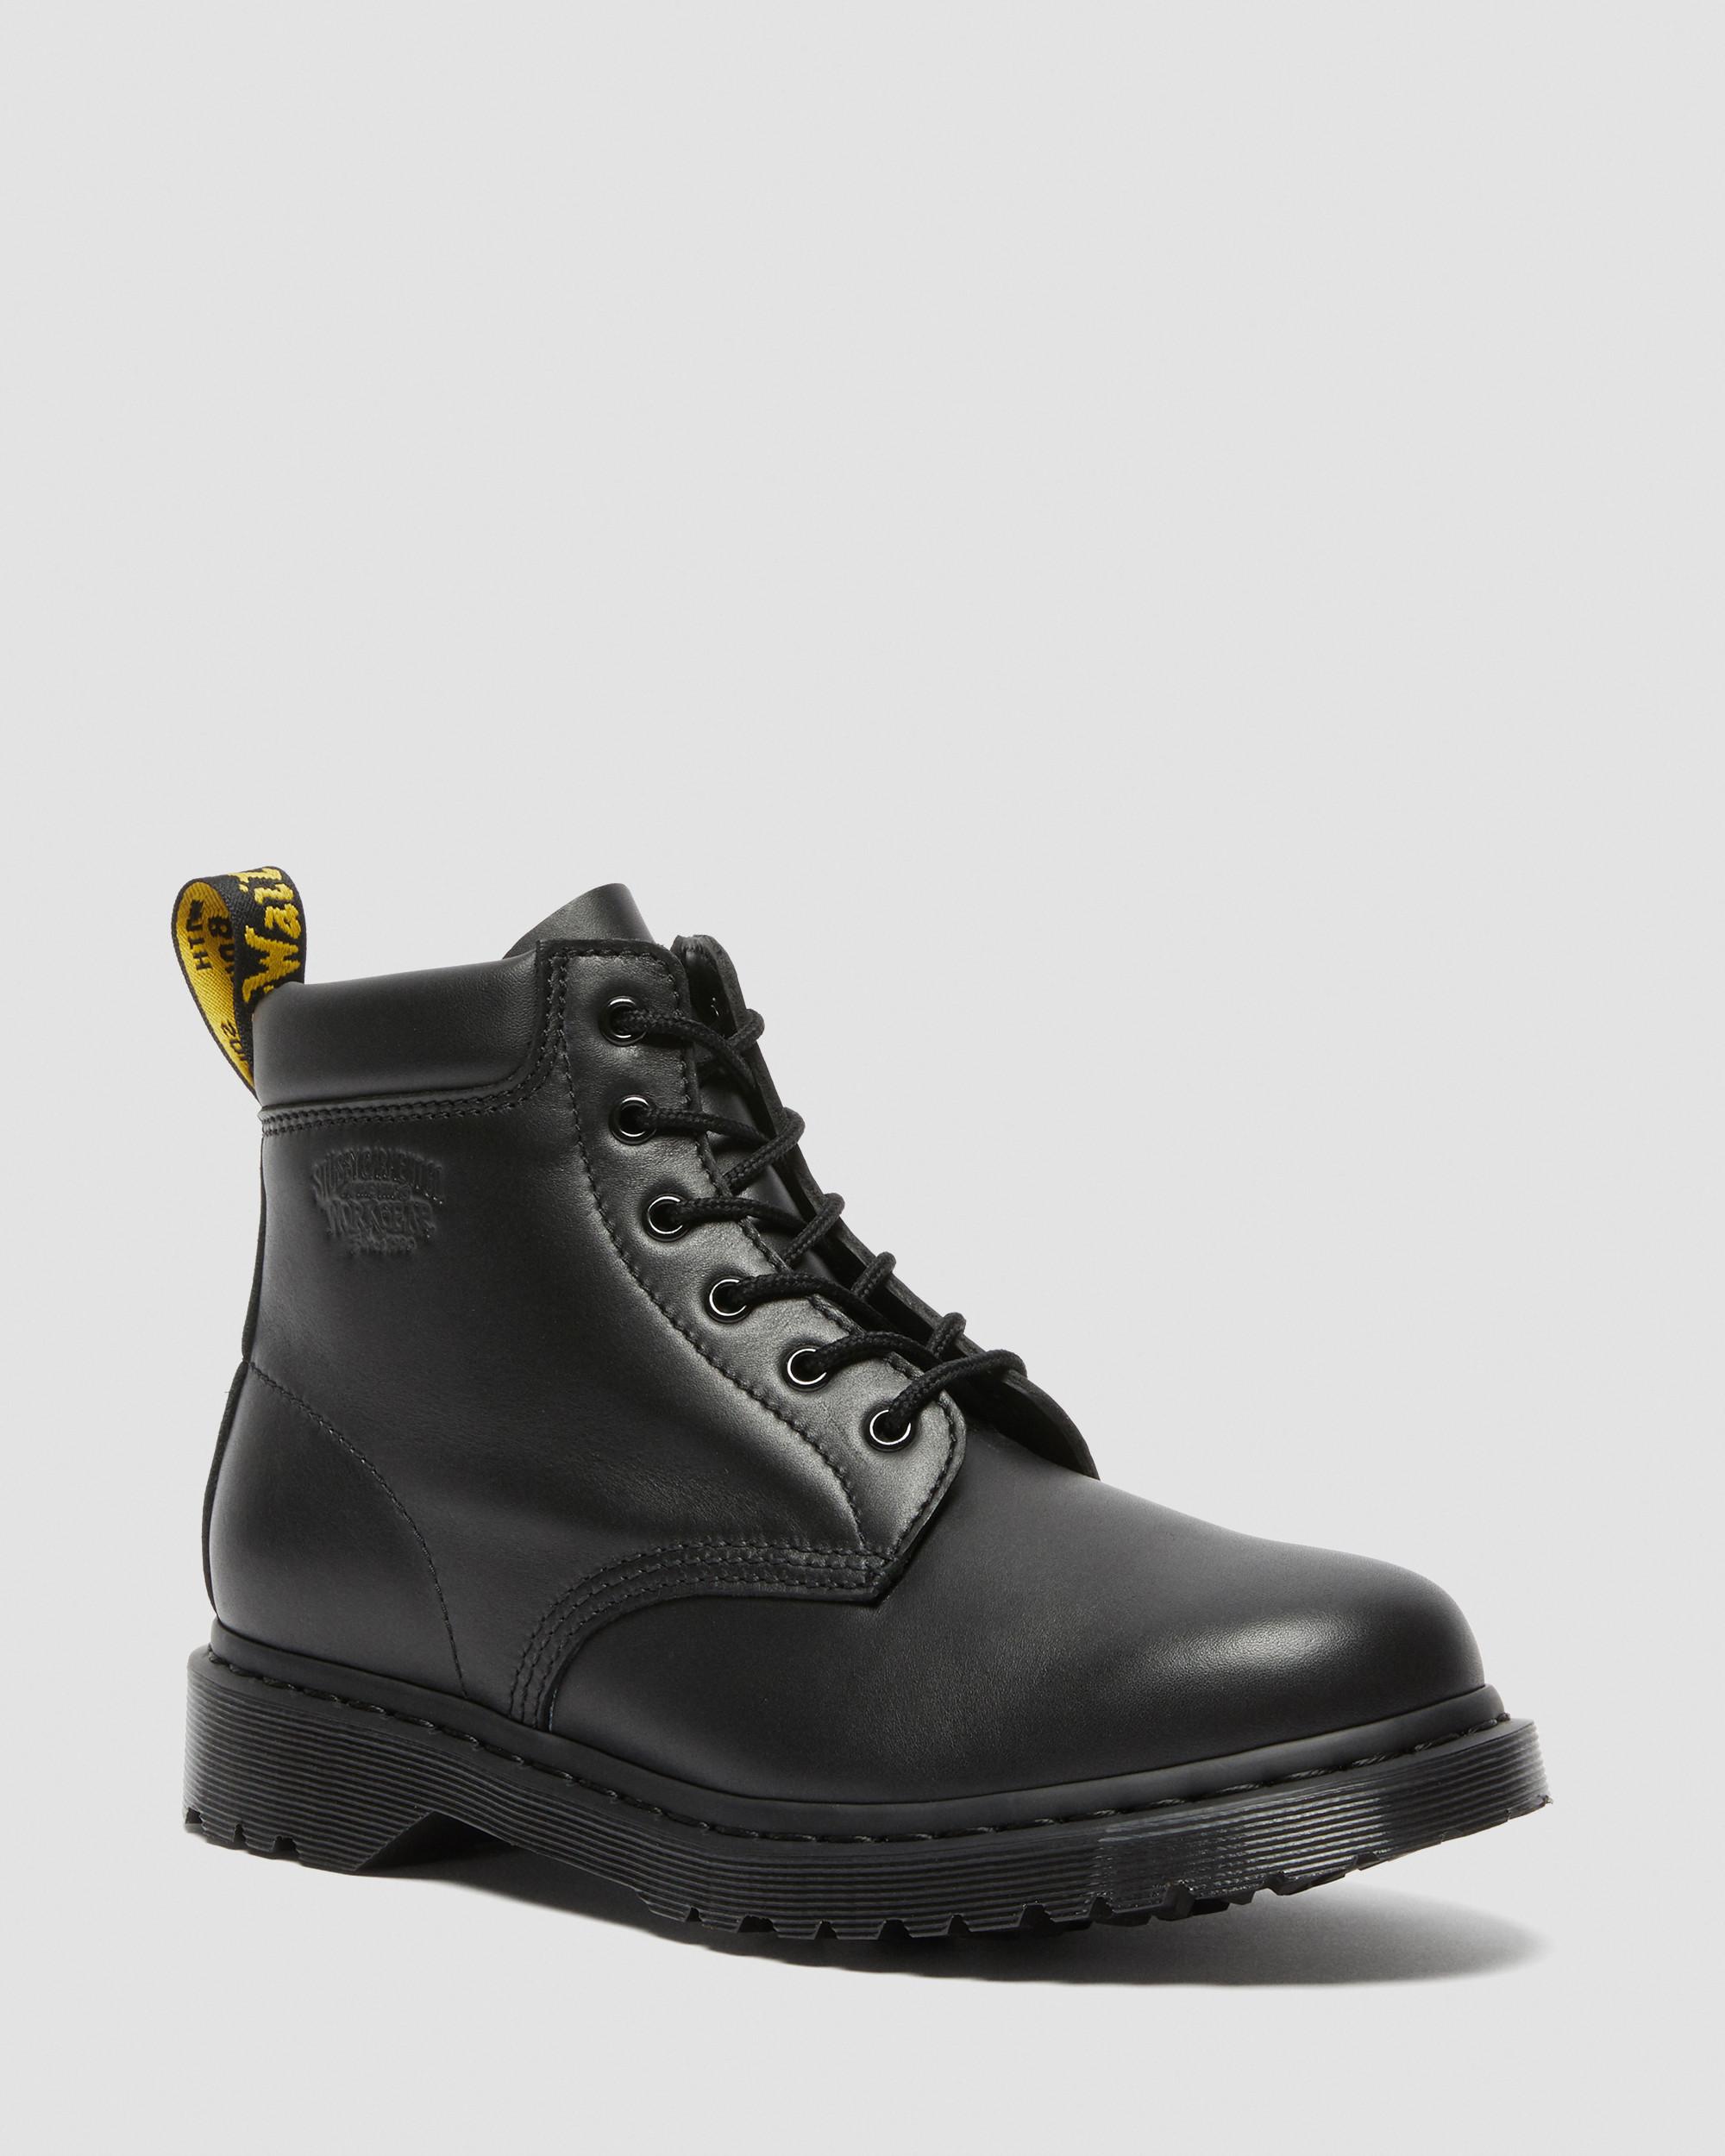 939 Stüssy Leather Ankle Boots in Black | Dr. Martens